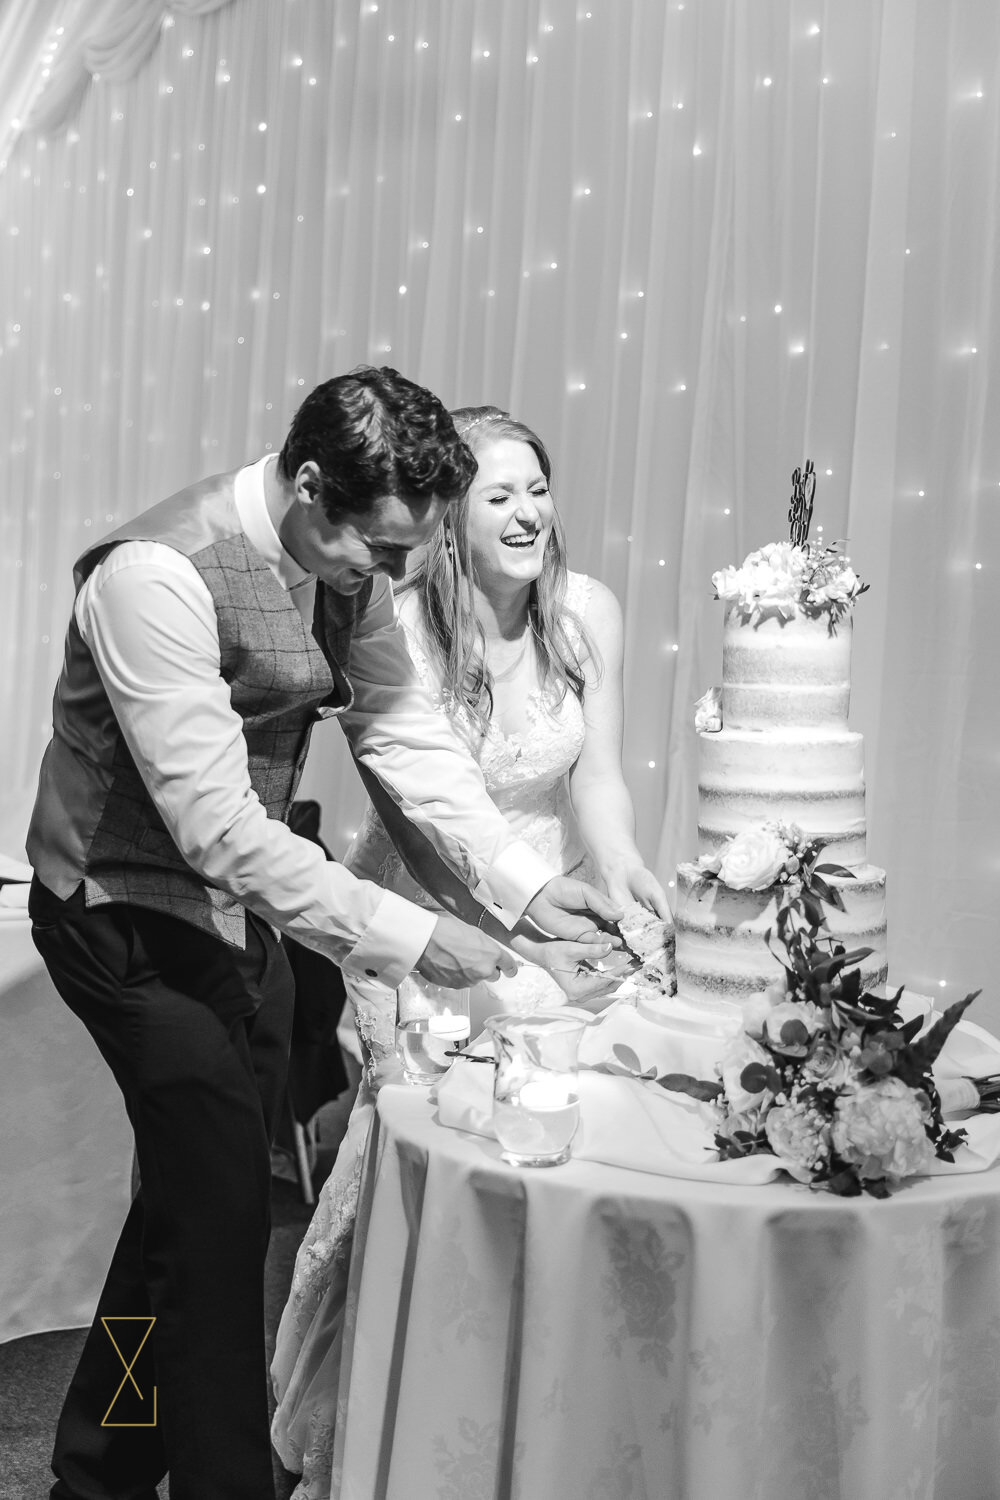 Bride-and-groom-laughing-while-cutting-wedding-cake